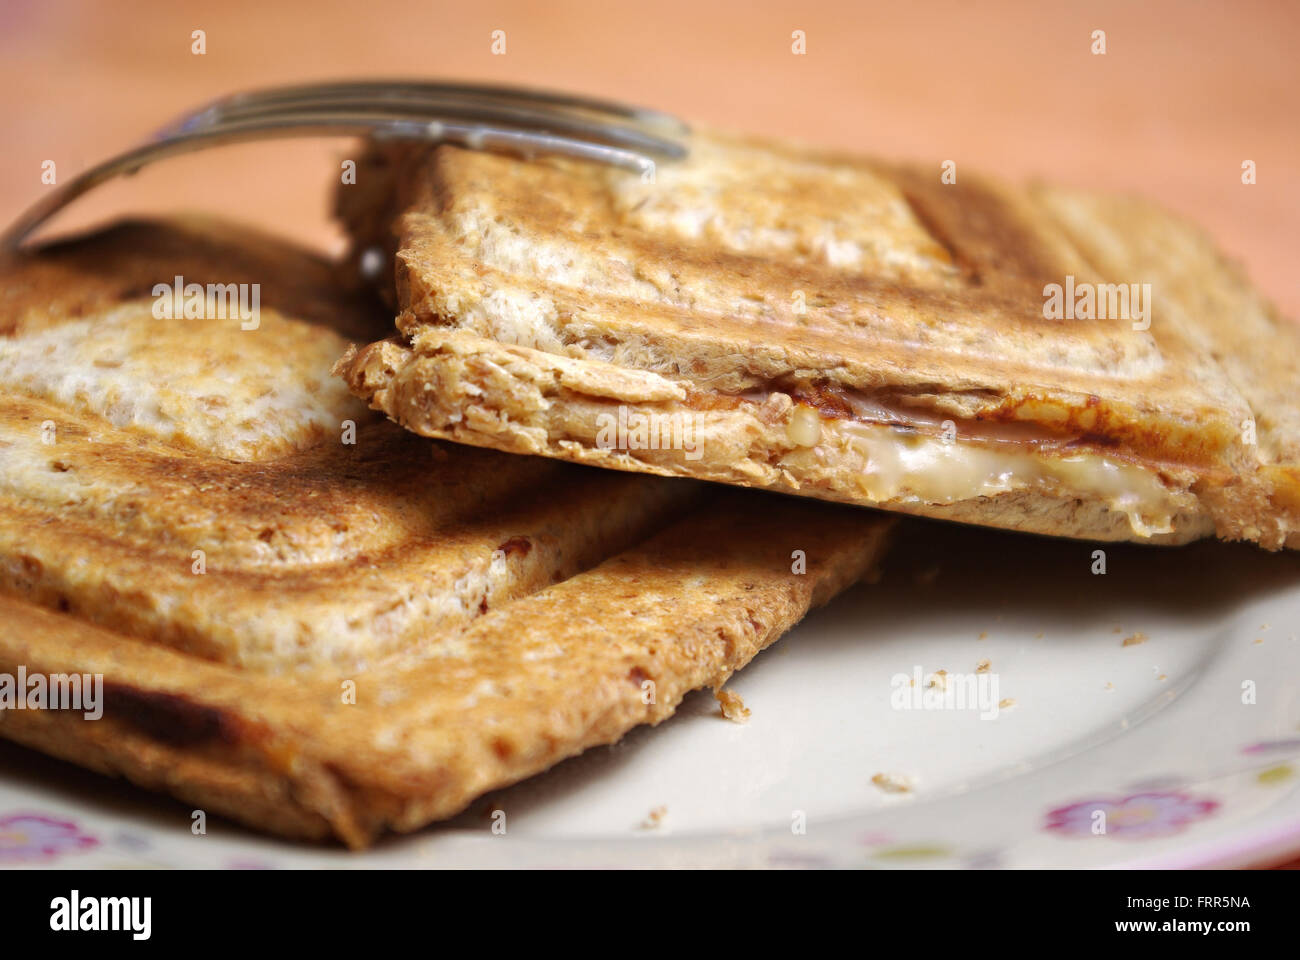 toast sandwitch on plate in shallow dof Stock Photo